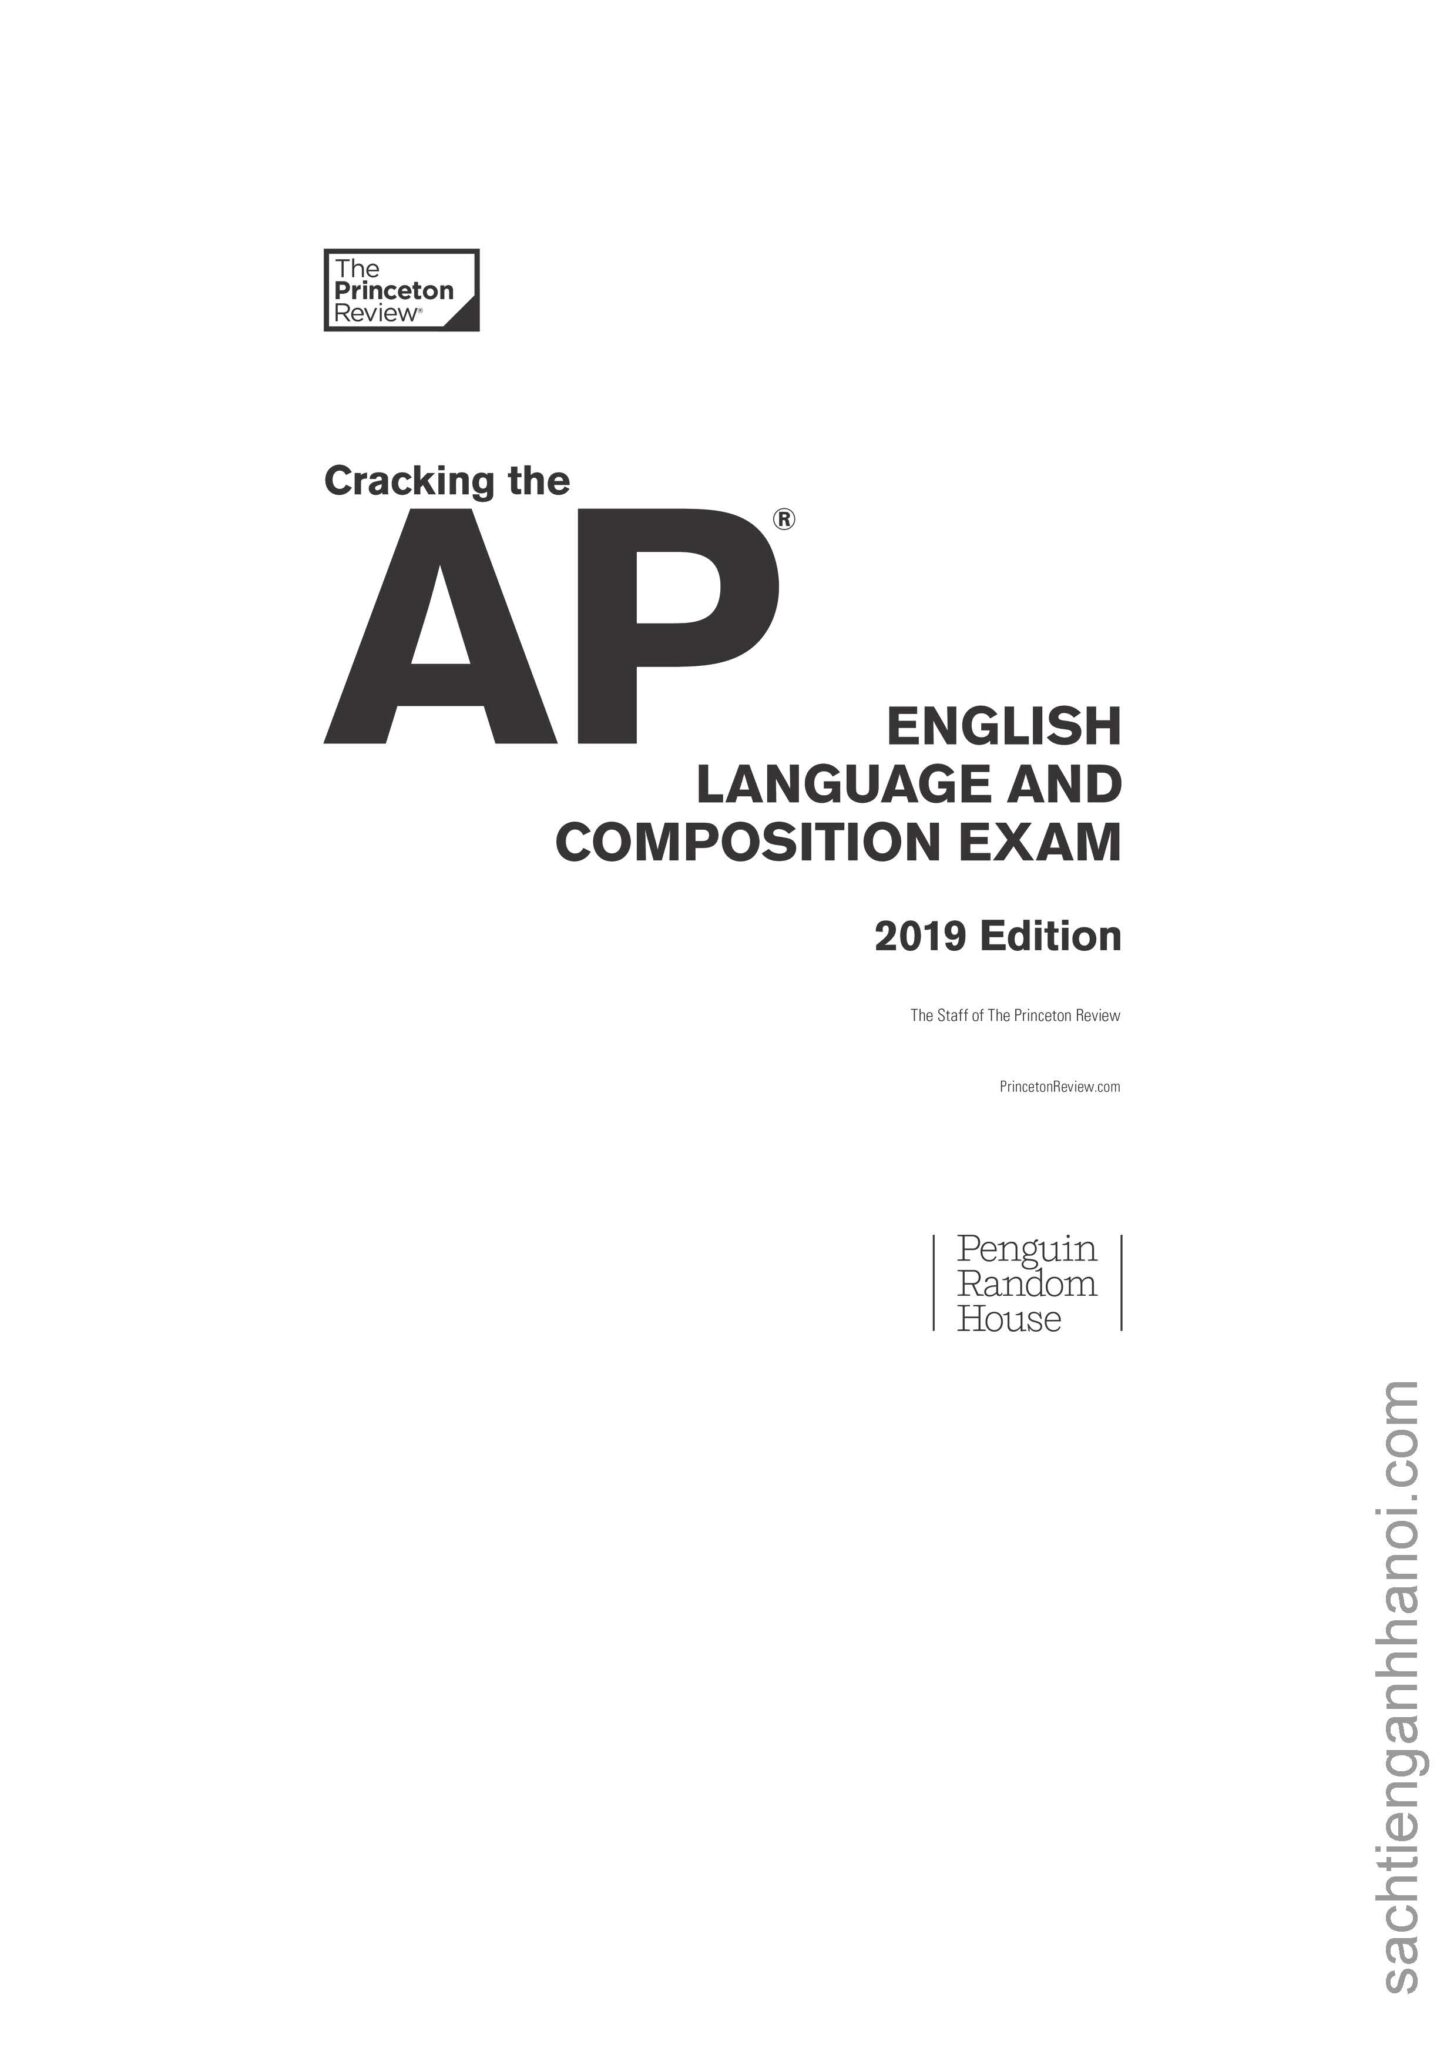 download-pdf-the-princeton-review-cracking-the-ap-english-language-composition-exam-2019